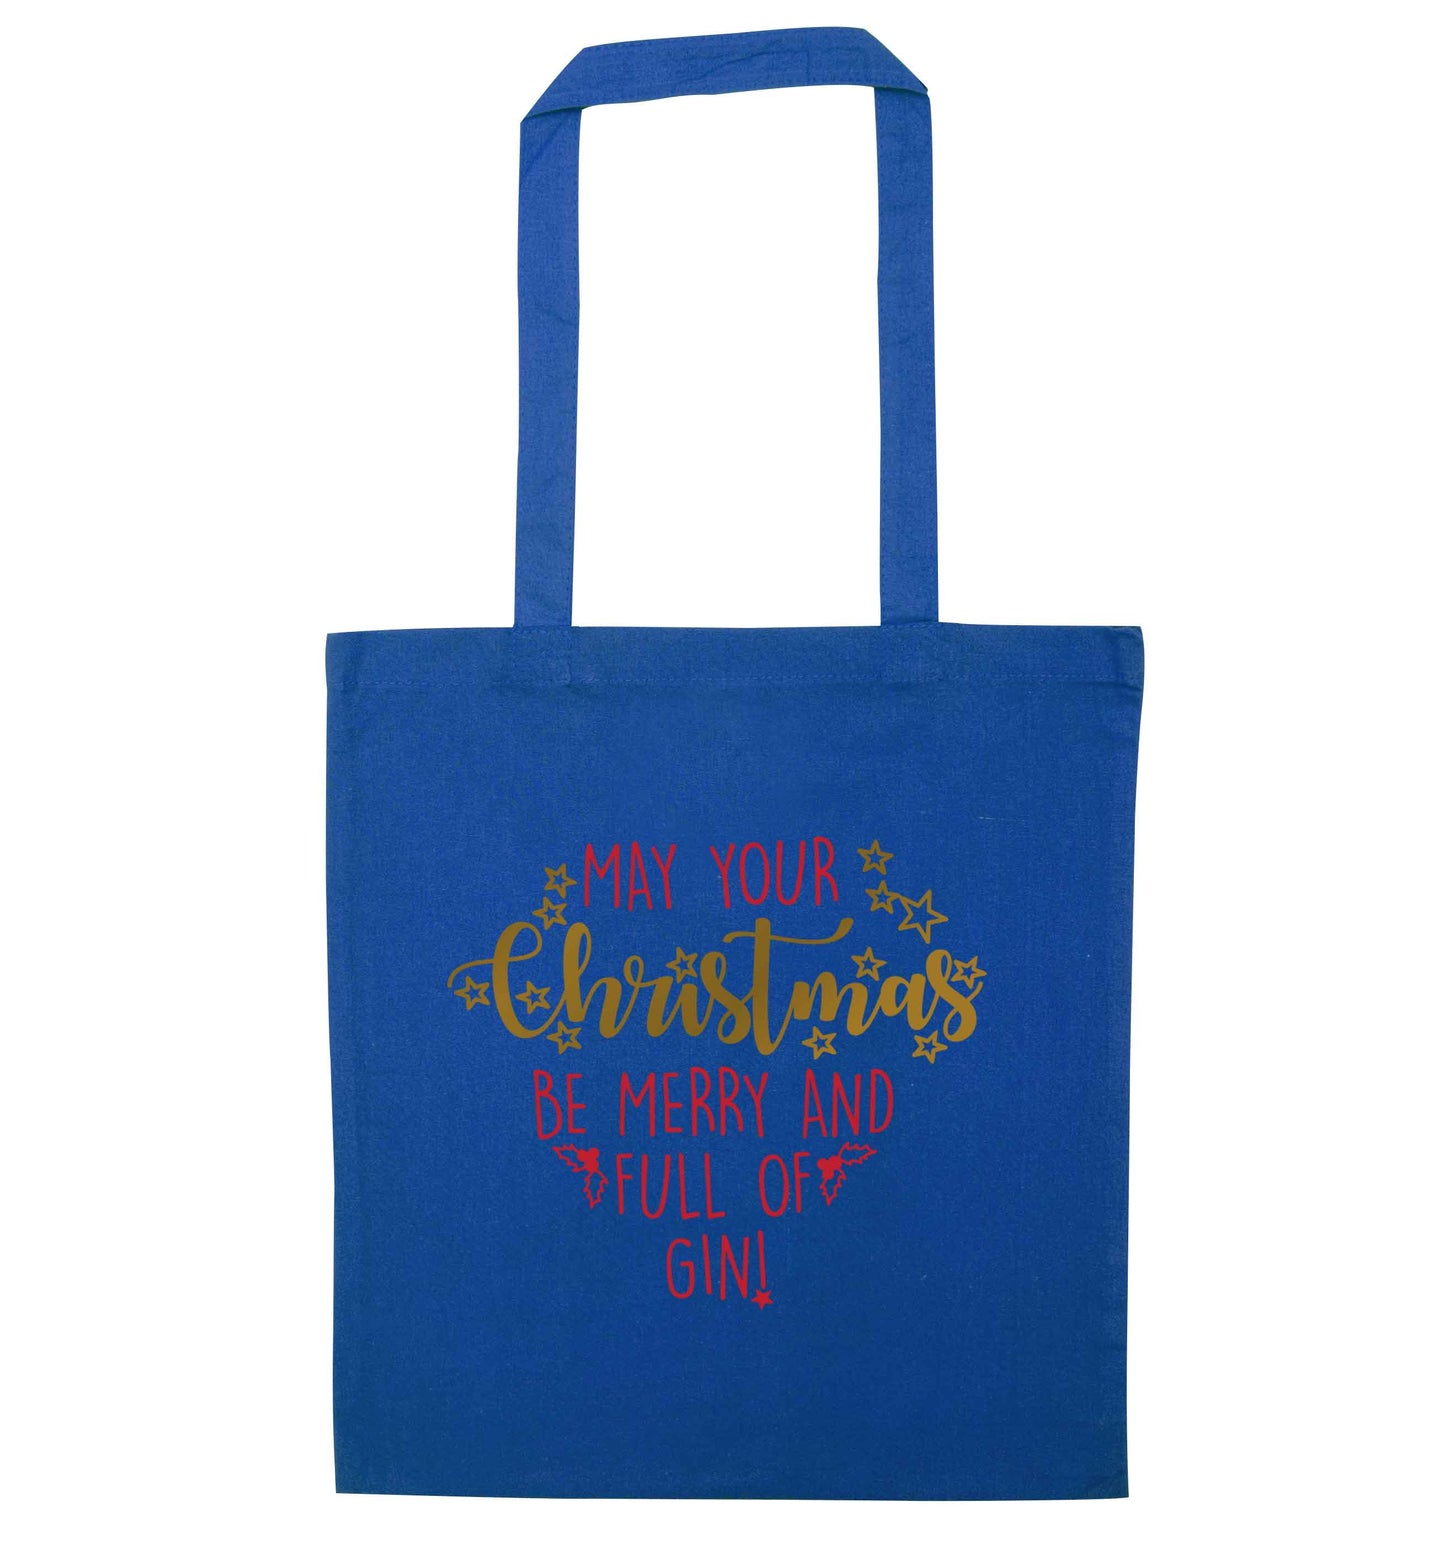 May your Christmas be merry and full of gin blue tote bag